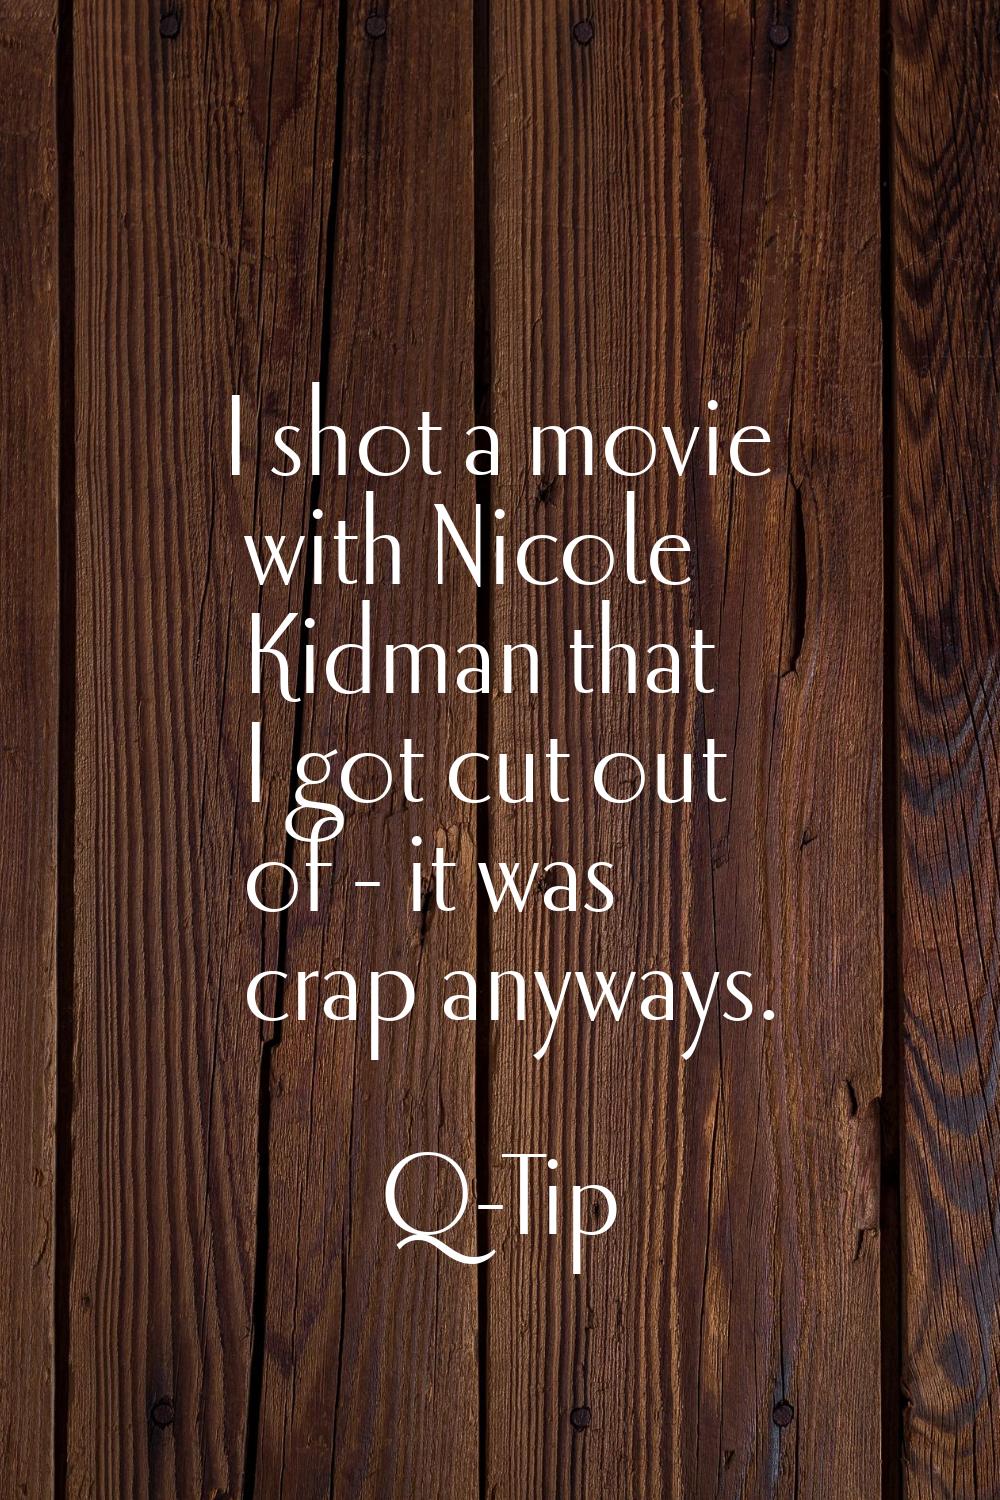 I shot a movie with Nicole Kidman that I got cut out of - it was crap anyways.